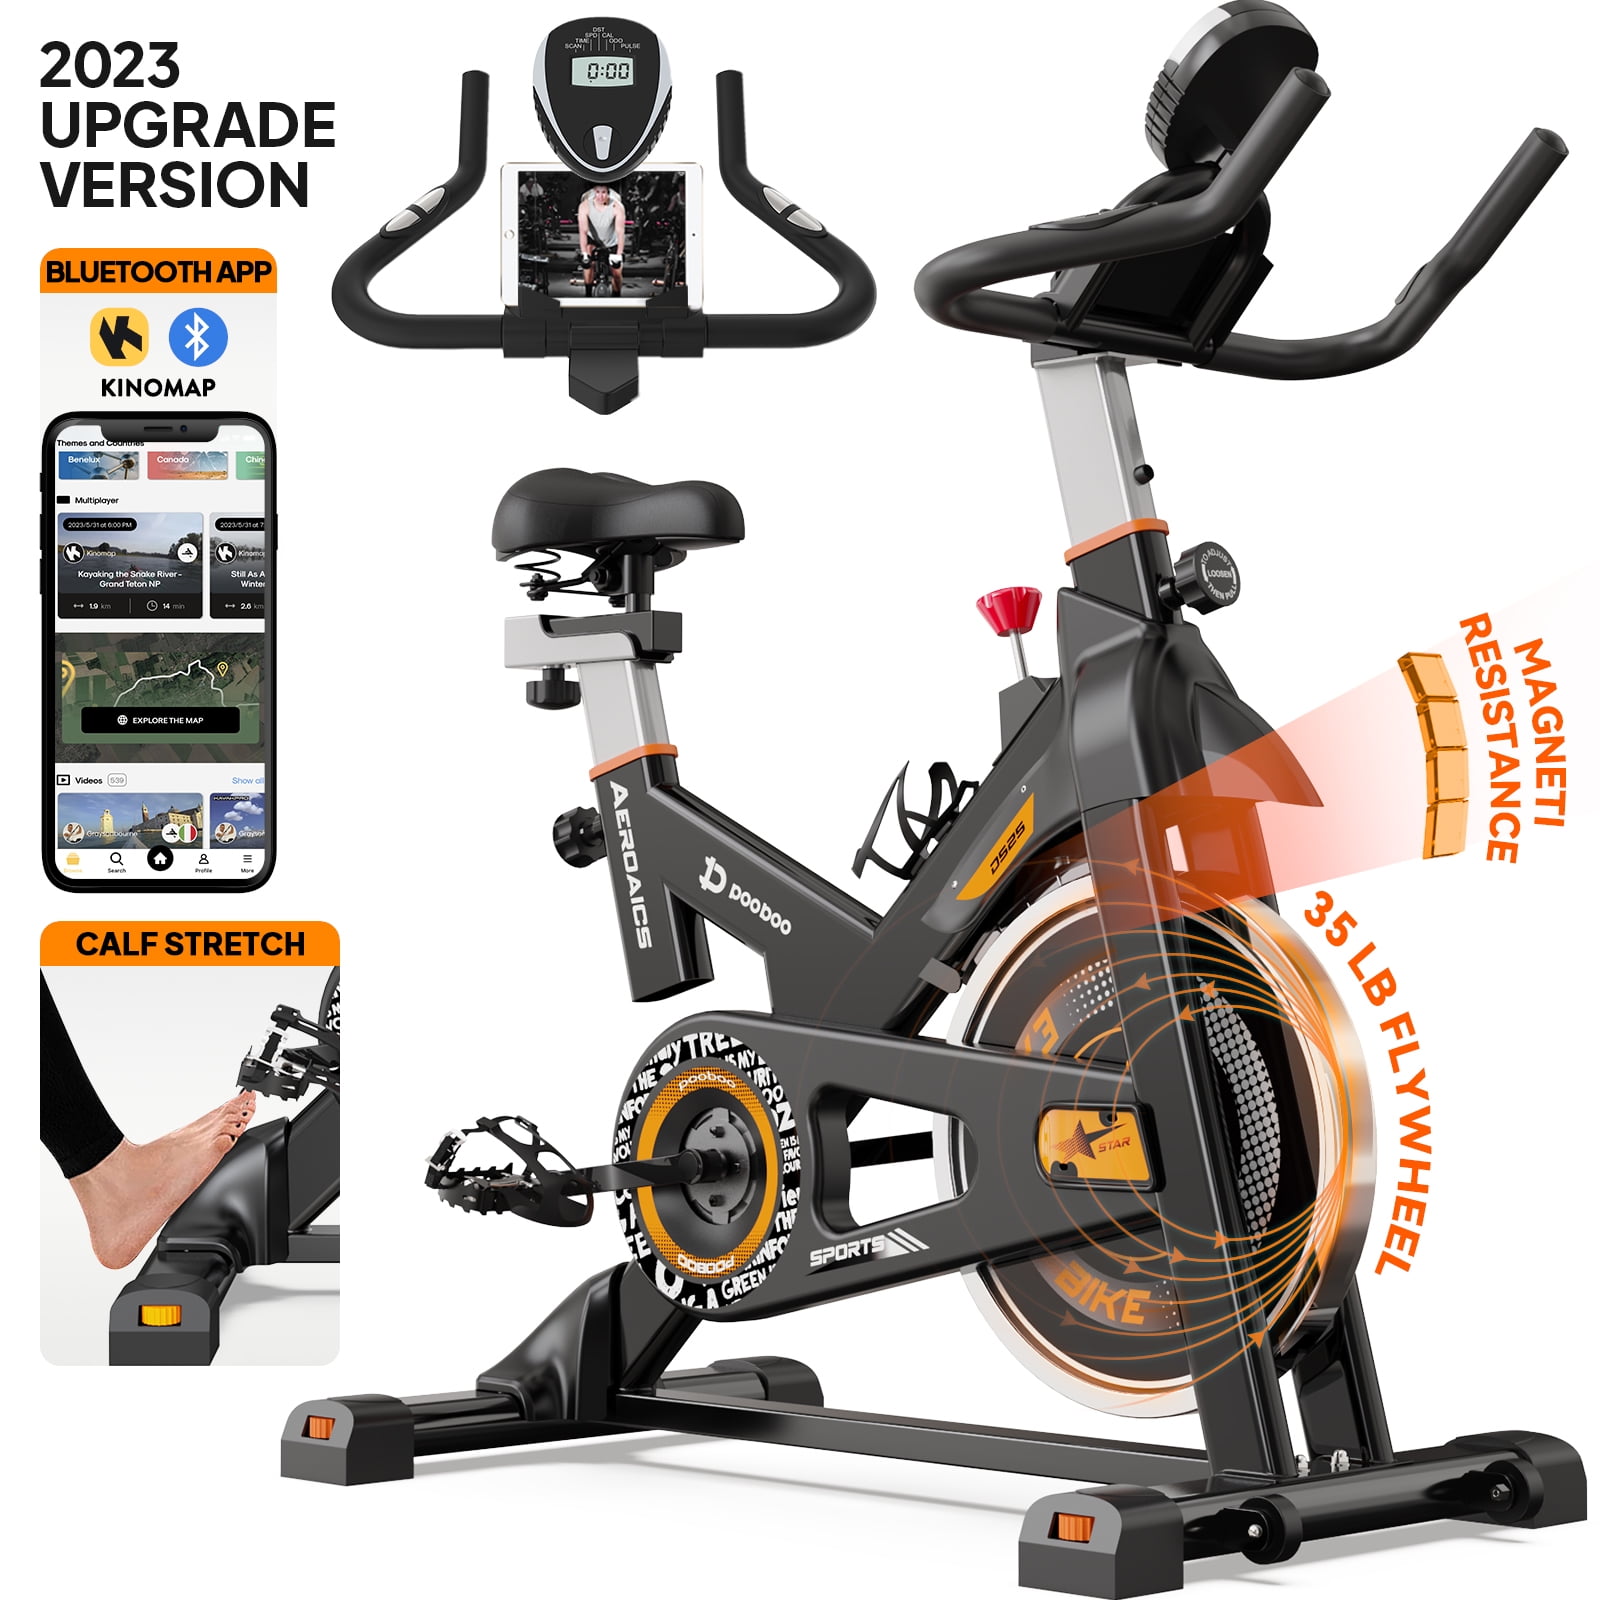 Pooboo Exercise Bike Indoor Cycling Bike Magnetic Cycle Bicycle 16-Level Stationary Magnetic Resistance for Home Office Cardio Workout Machine Max Weight 350 lbs